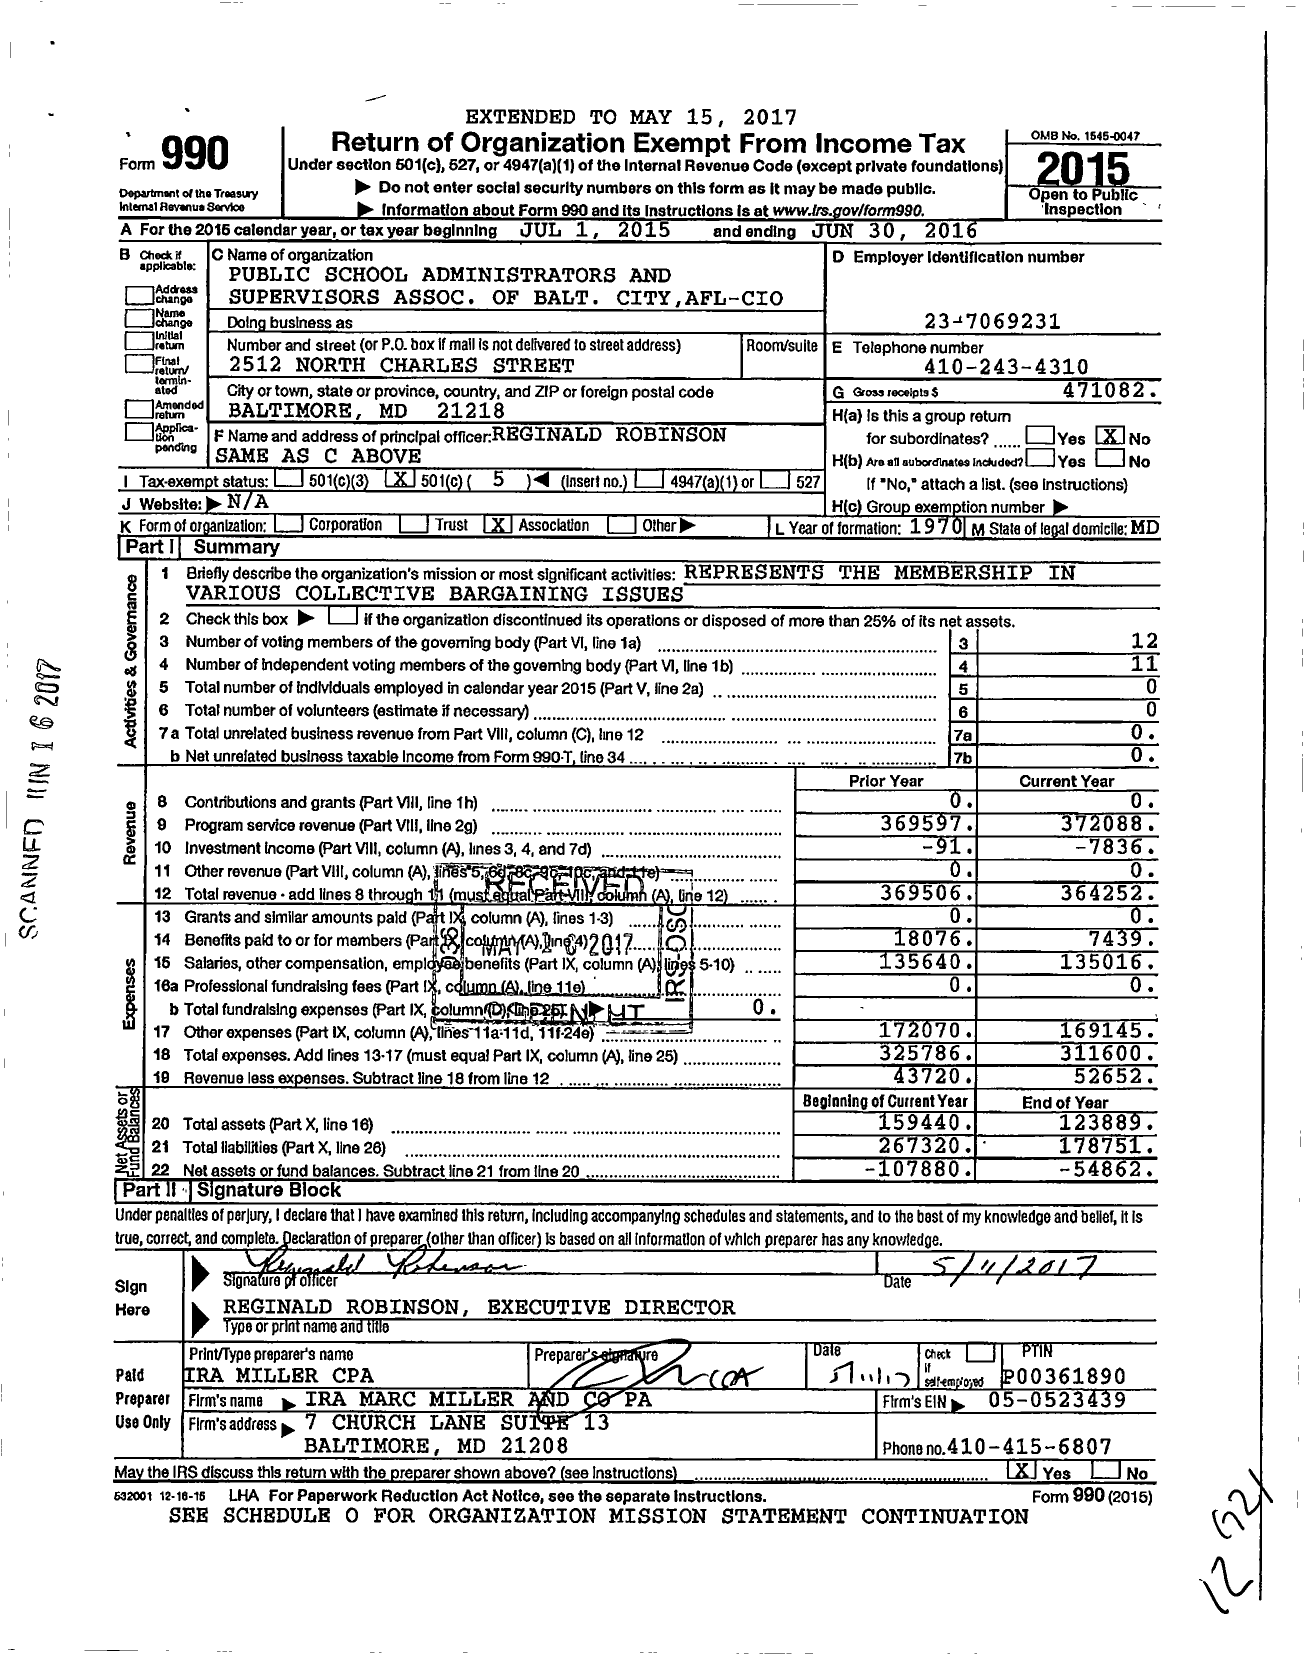 Image of first page of 2015 Form 990O for Public School Administrators and Supervisors Association of Baltimore